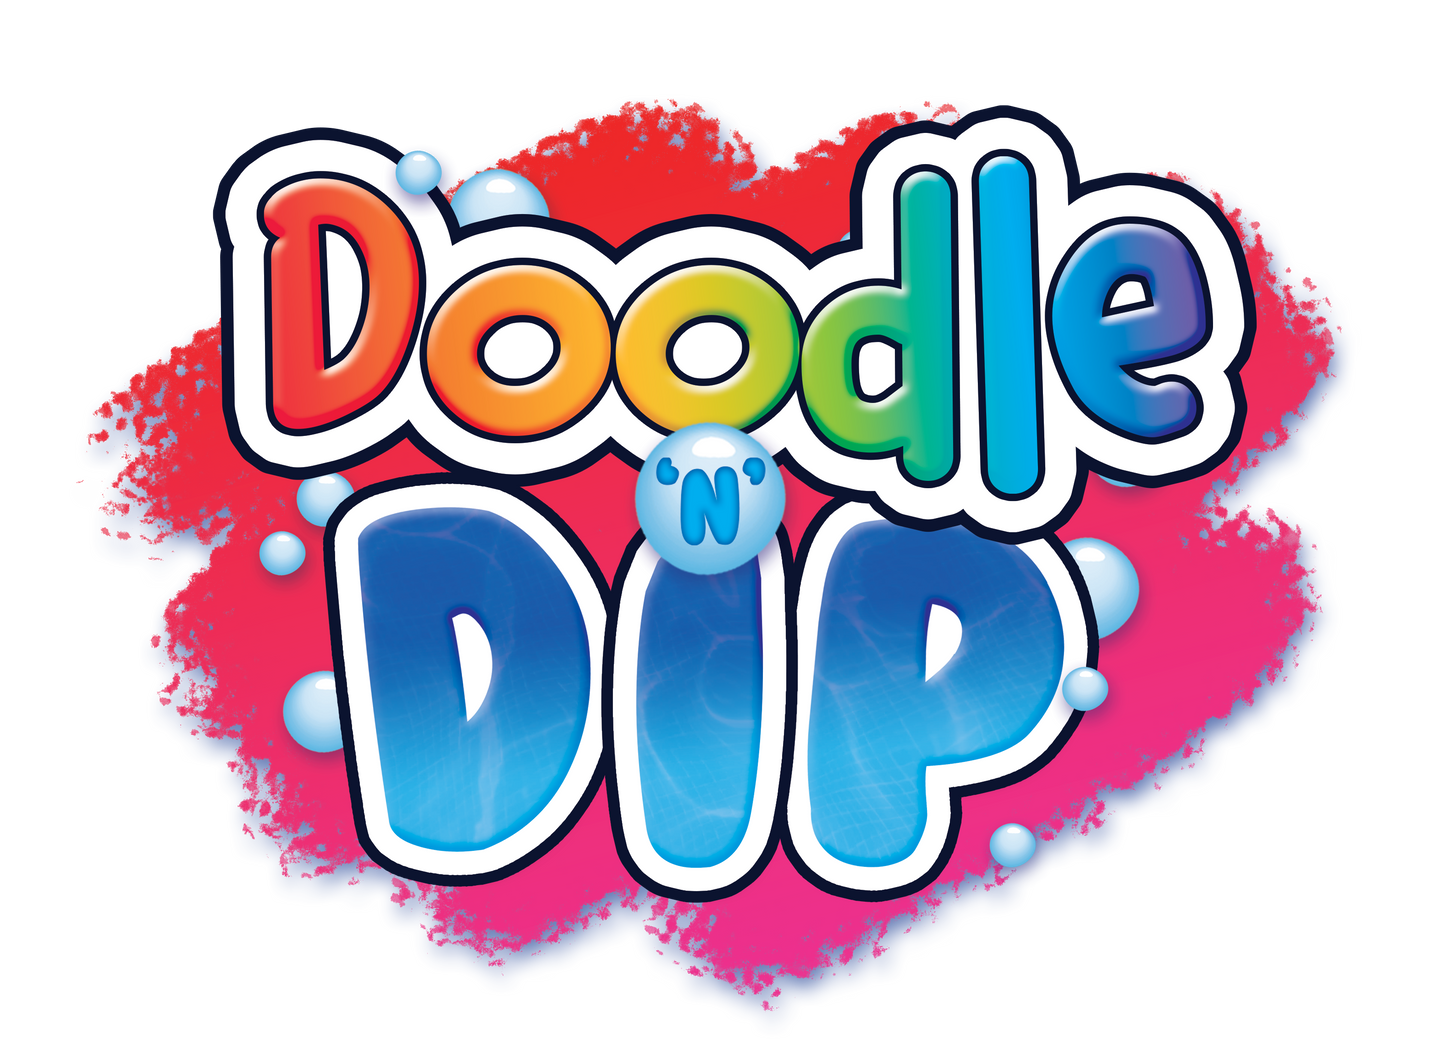 Doodle and Dip